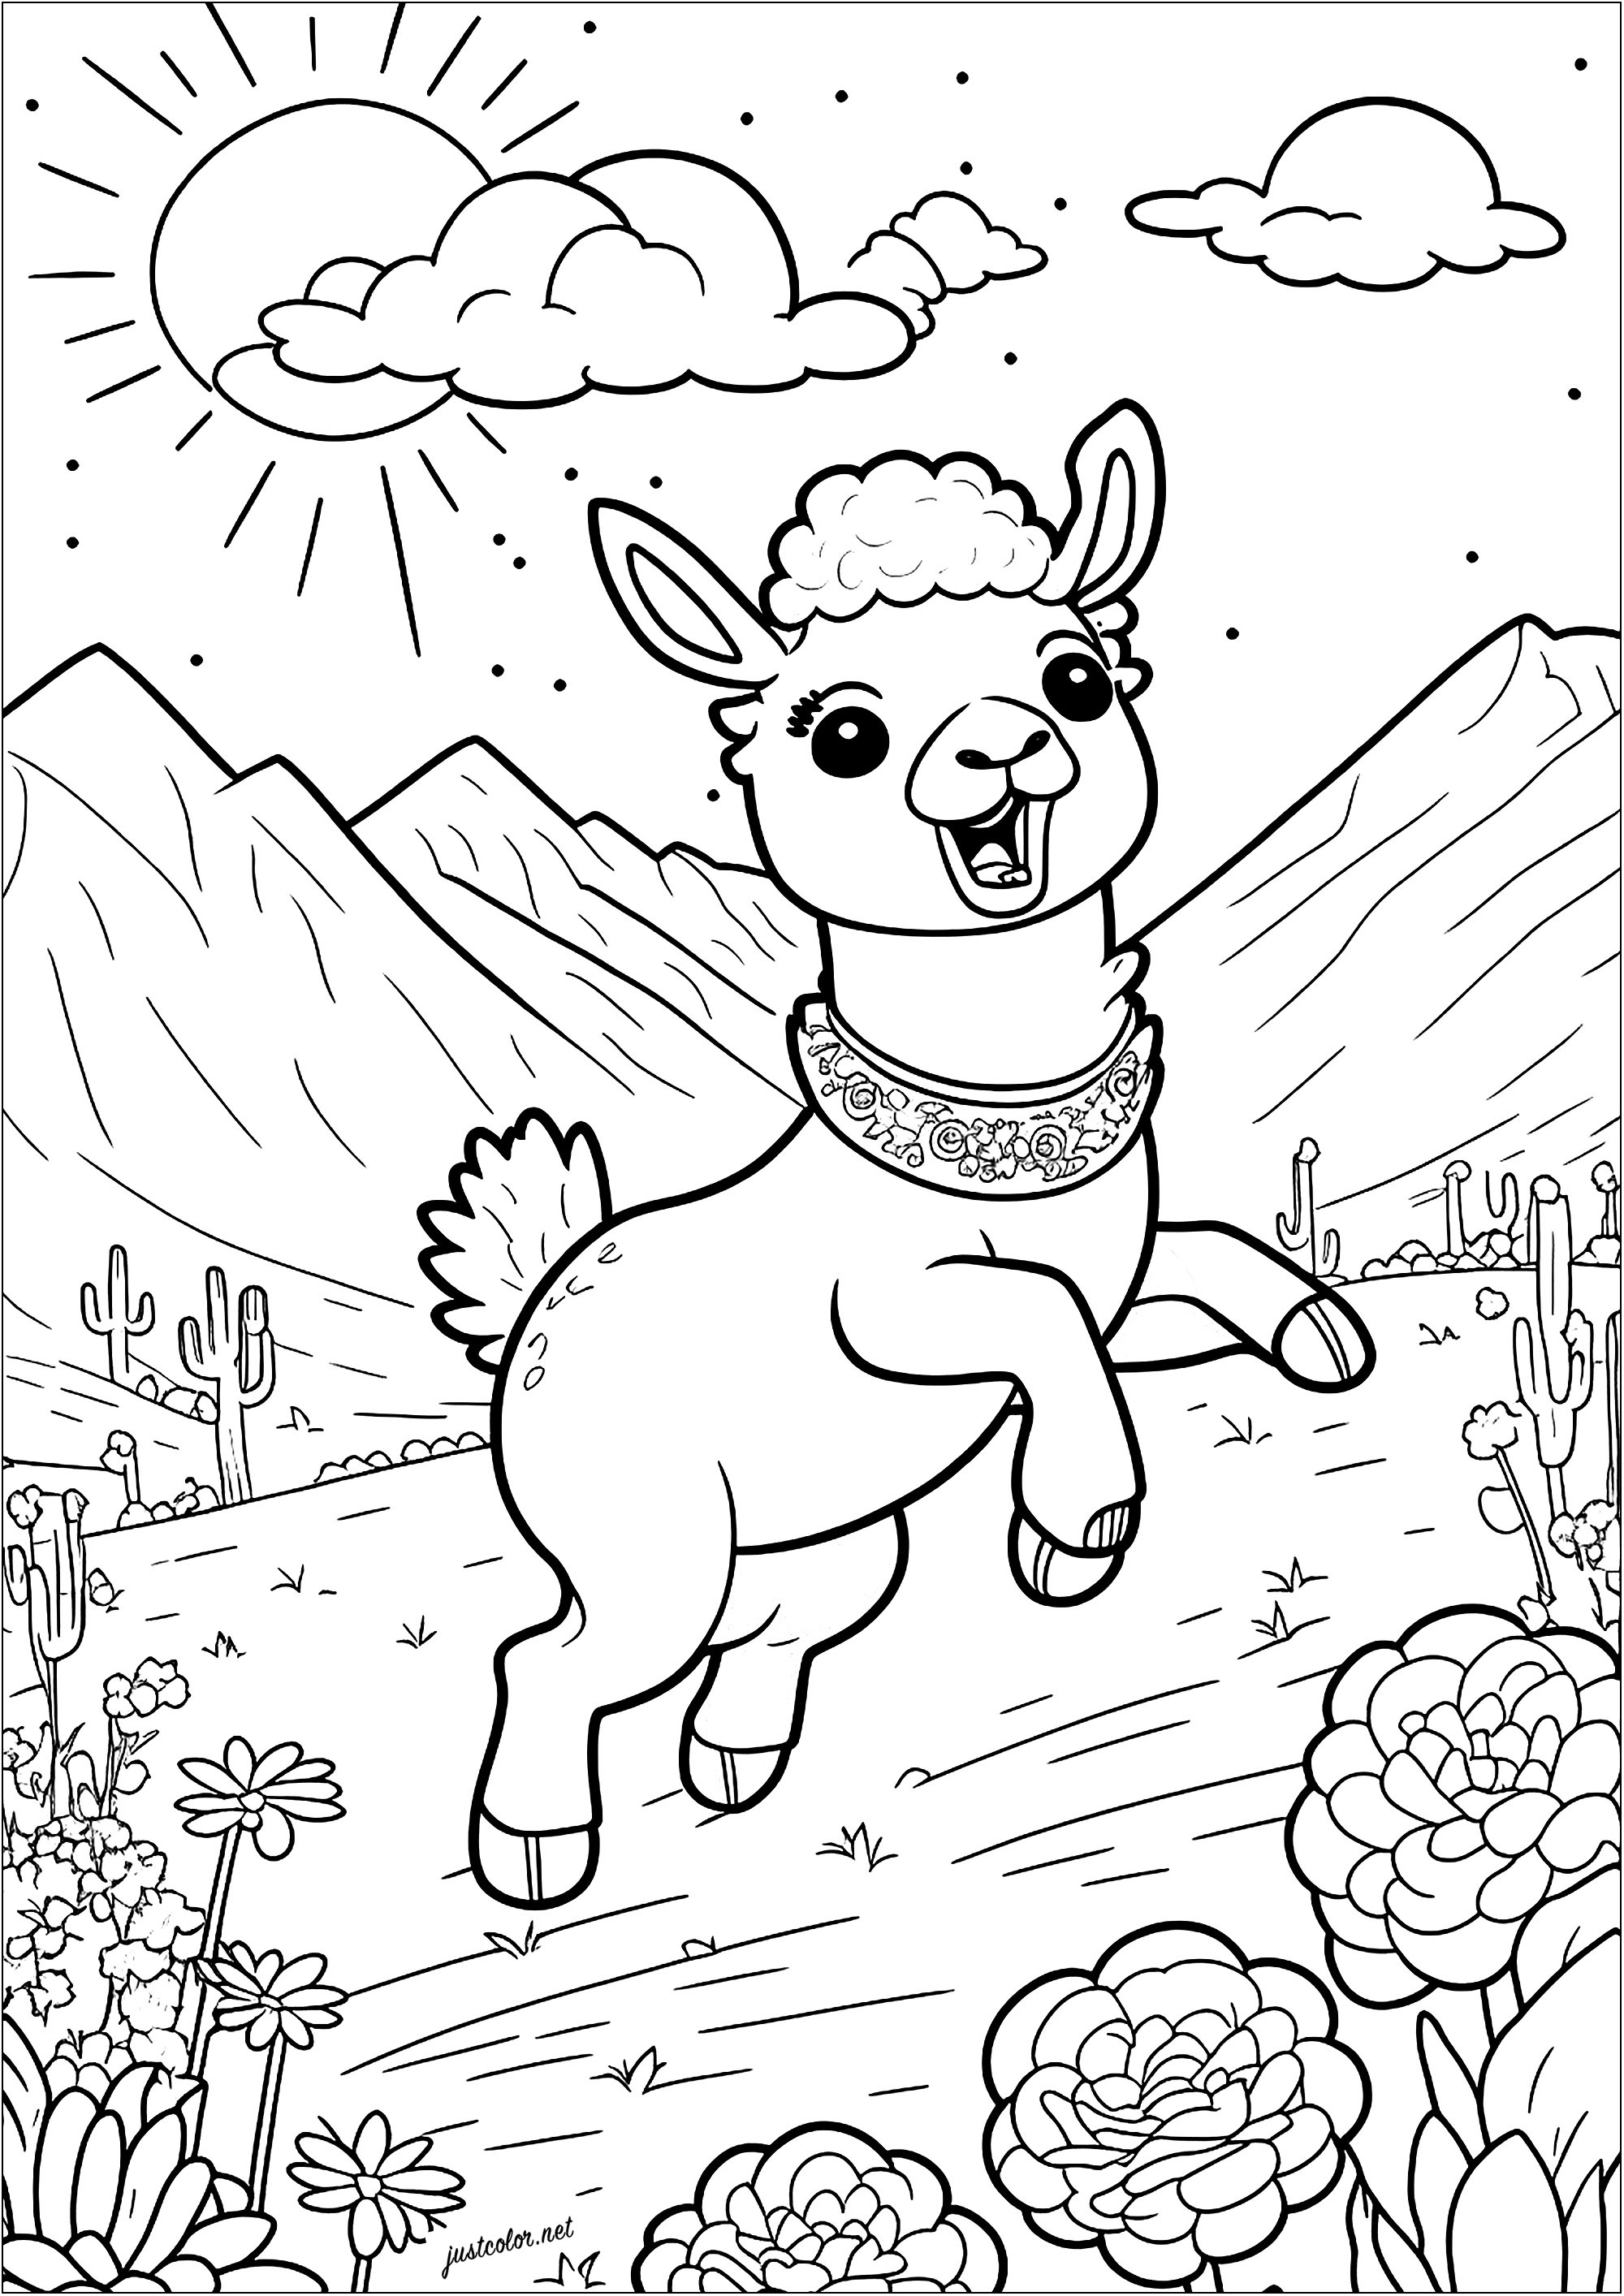 Coloring of a young llama jumping in a mountainous and flowery landscape. This young llama's long ears are raised to the sky, and his big eyes are shining with excitement.
